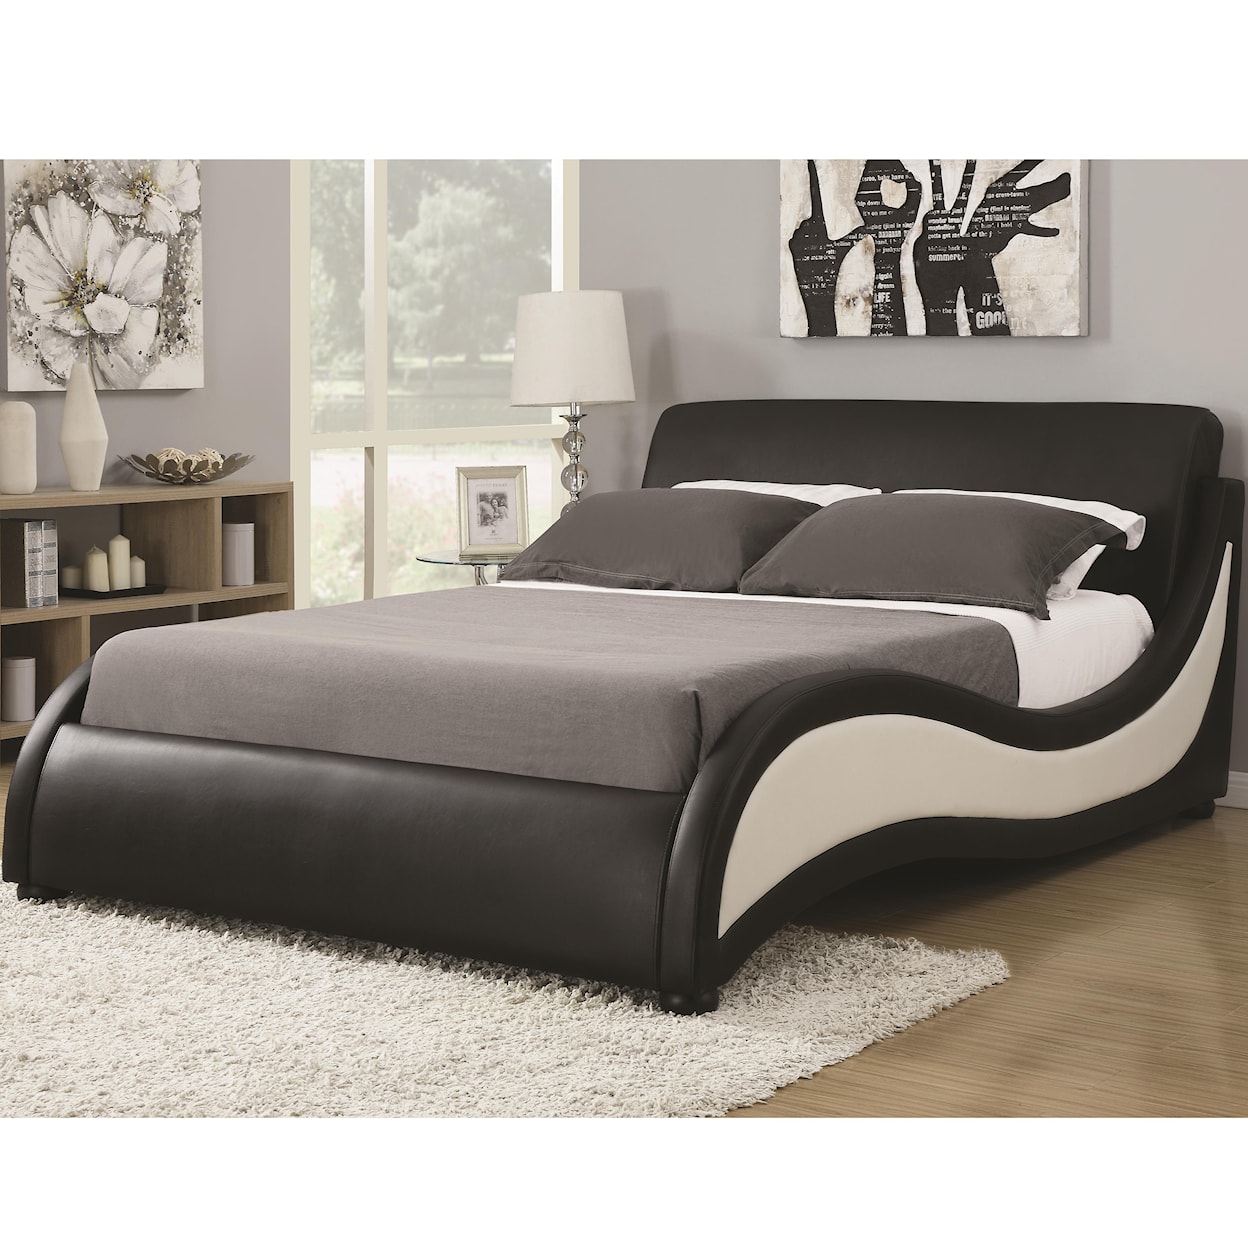 Michael Alan CSR Select Upholstered Beds Cal King Niguel Bed